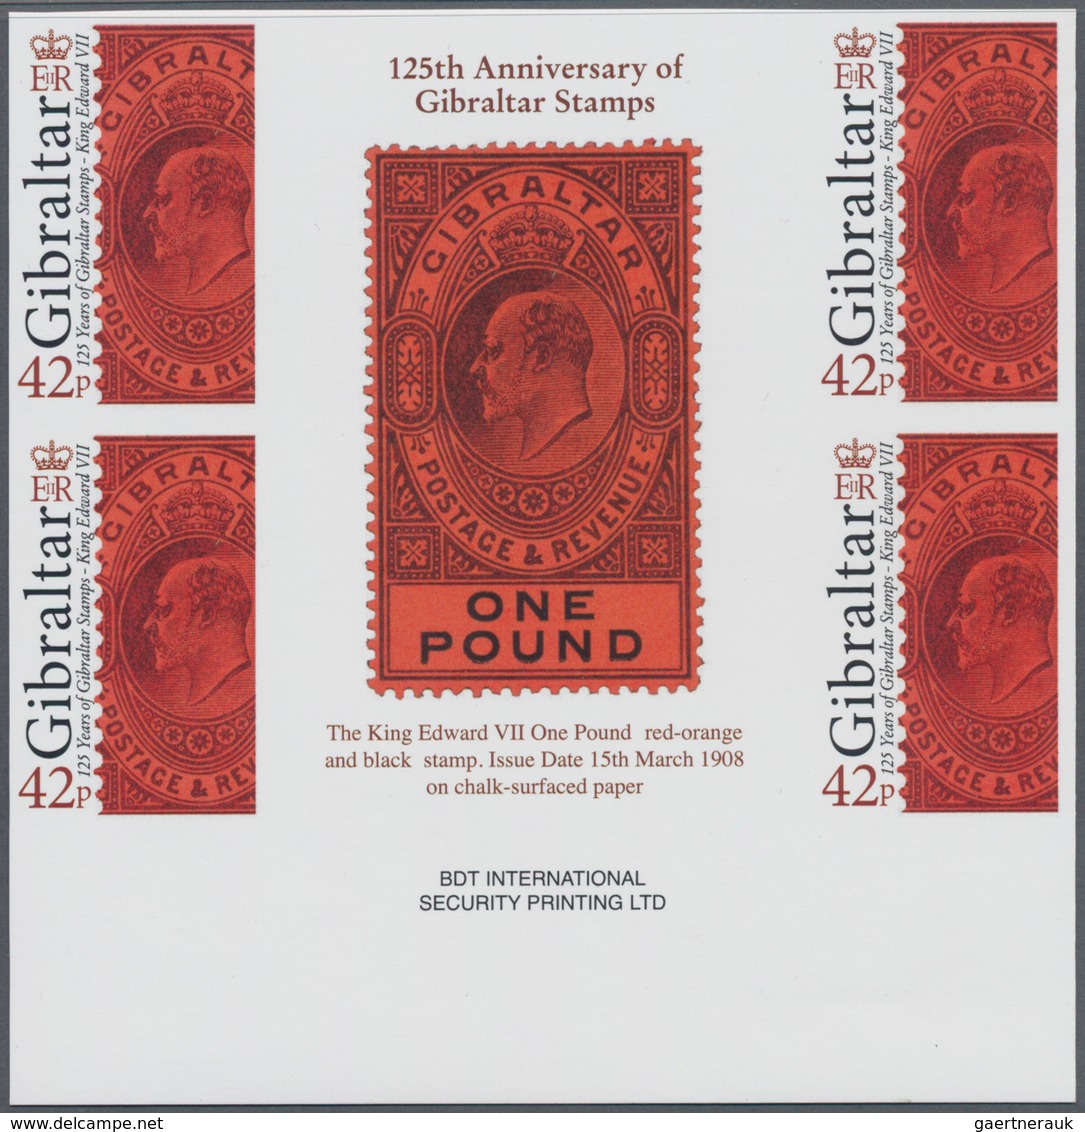 Gibraltar: 2011. Imperforate Block Of 2 Horizontal Gutter Pairs (4 Stamps) For The 42p Value Of The - Gibraltar